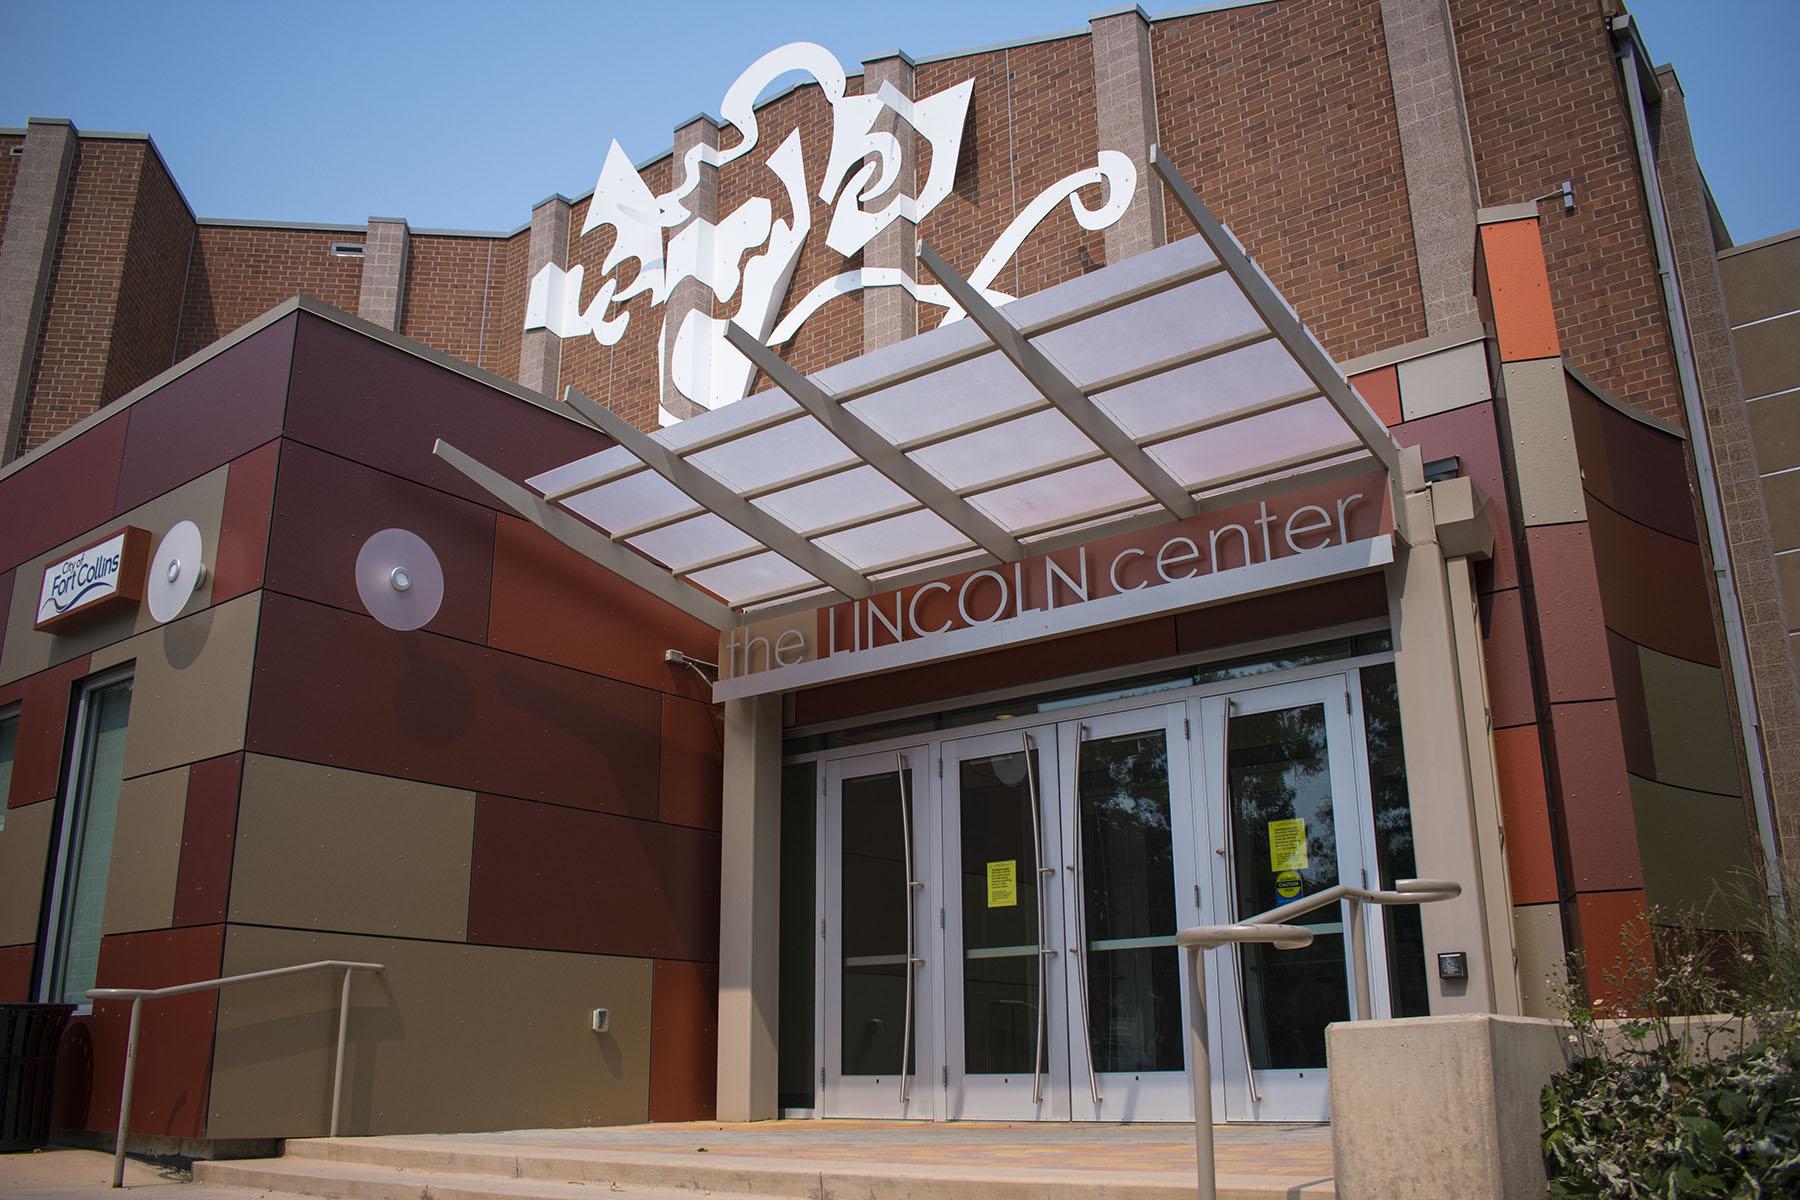 The Lincoln Center is a performance venue and visual arts center located in Fort Collins.